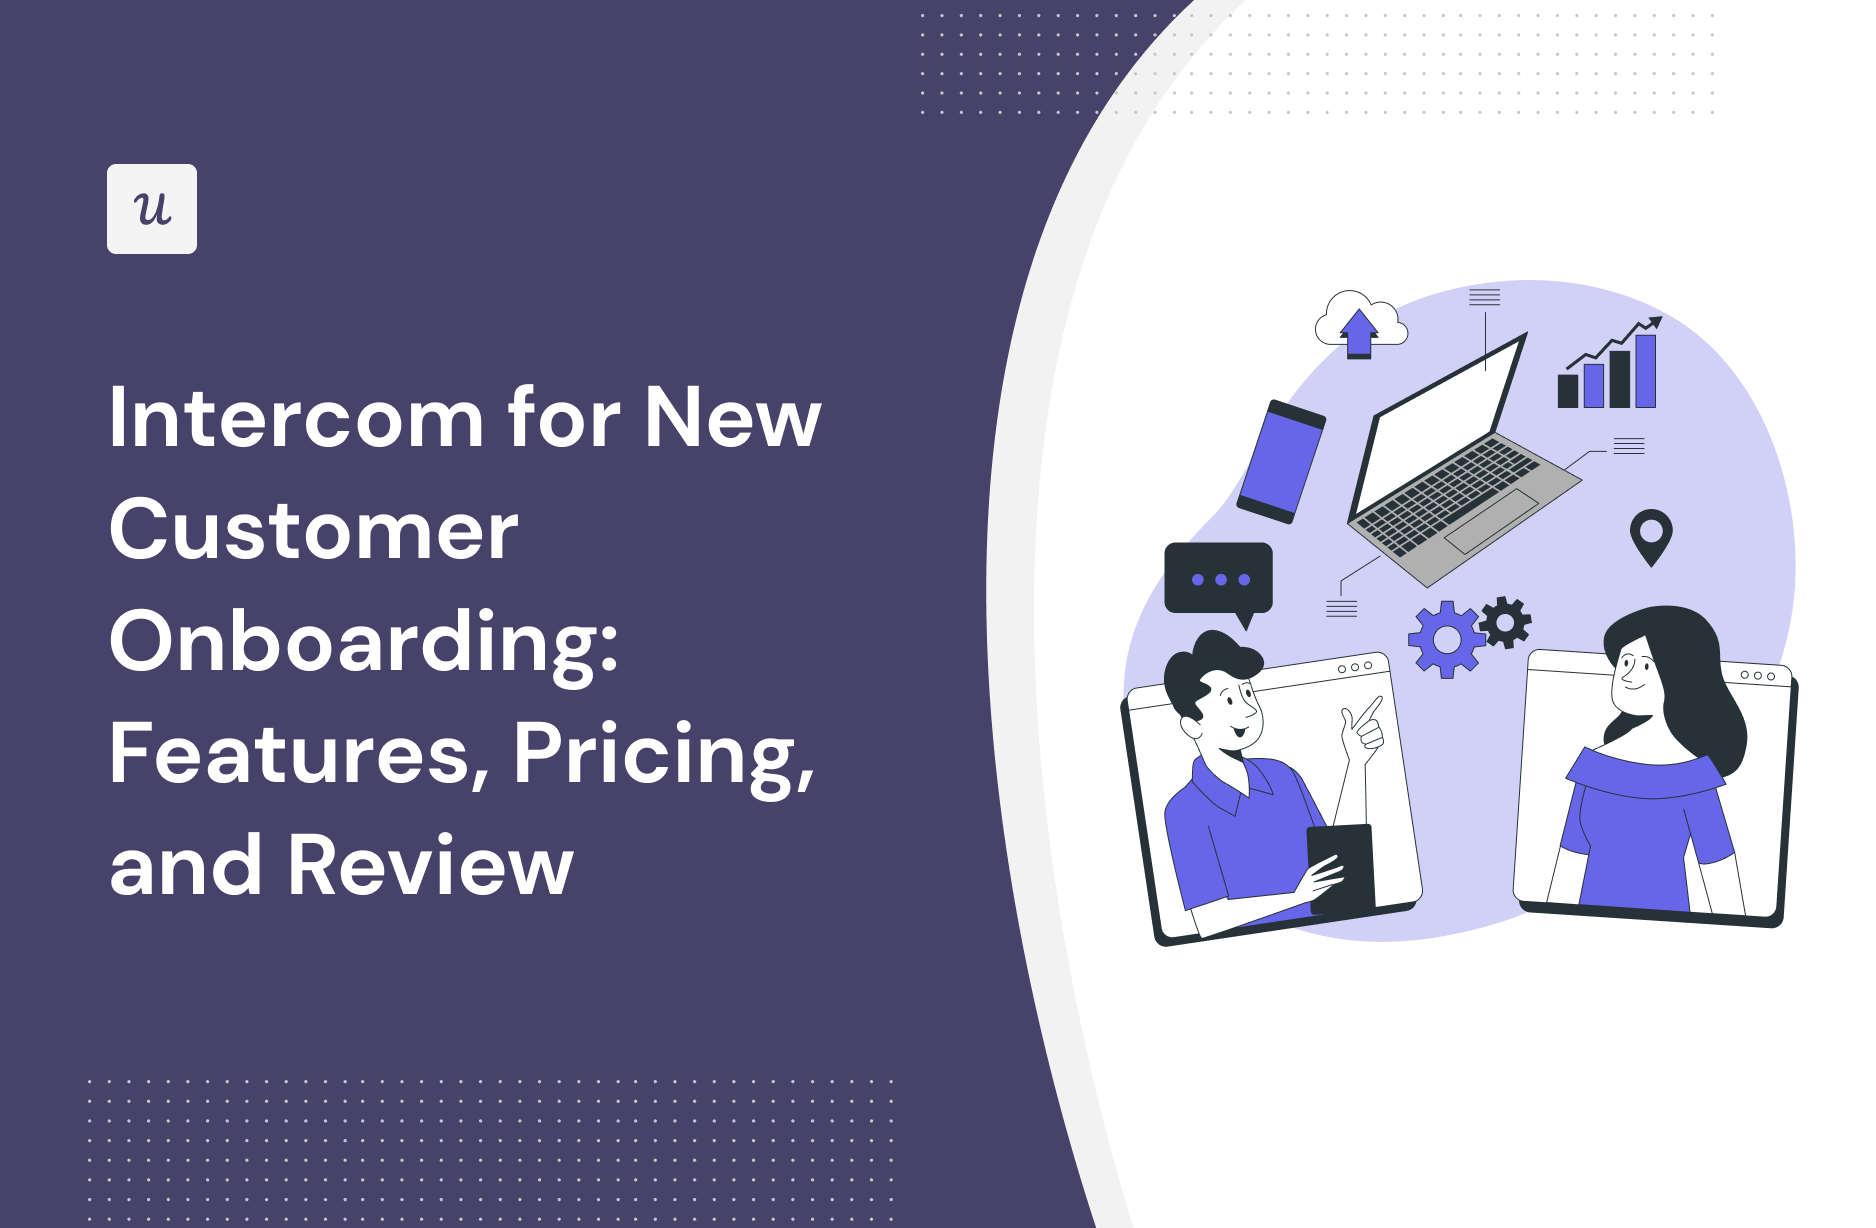 Intercom for New Customer Onboarding: Features, Pricing, and Review